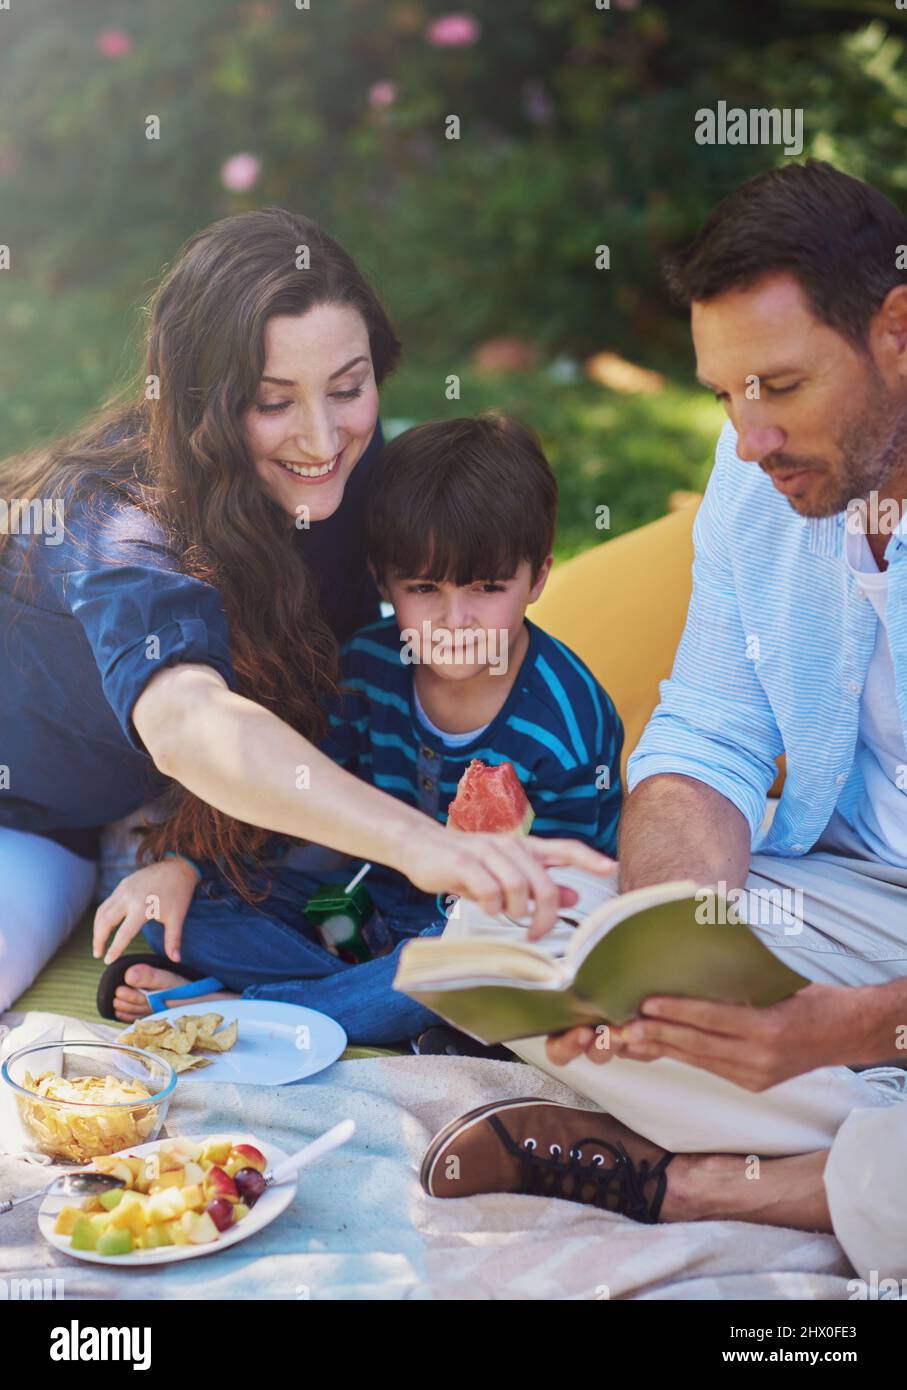 Their favourite story to read as a family. Shot of a parents reading a book to their son during a picnic in the park. Stock Photo